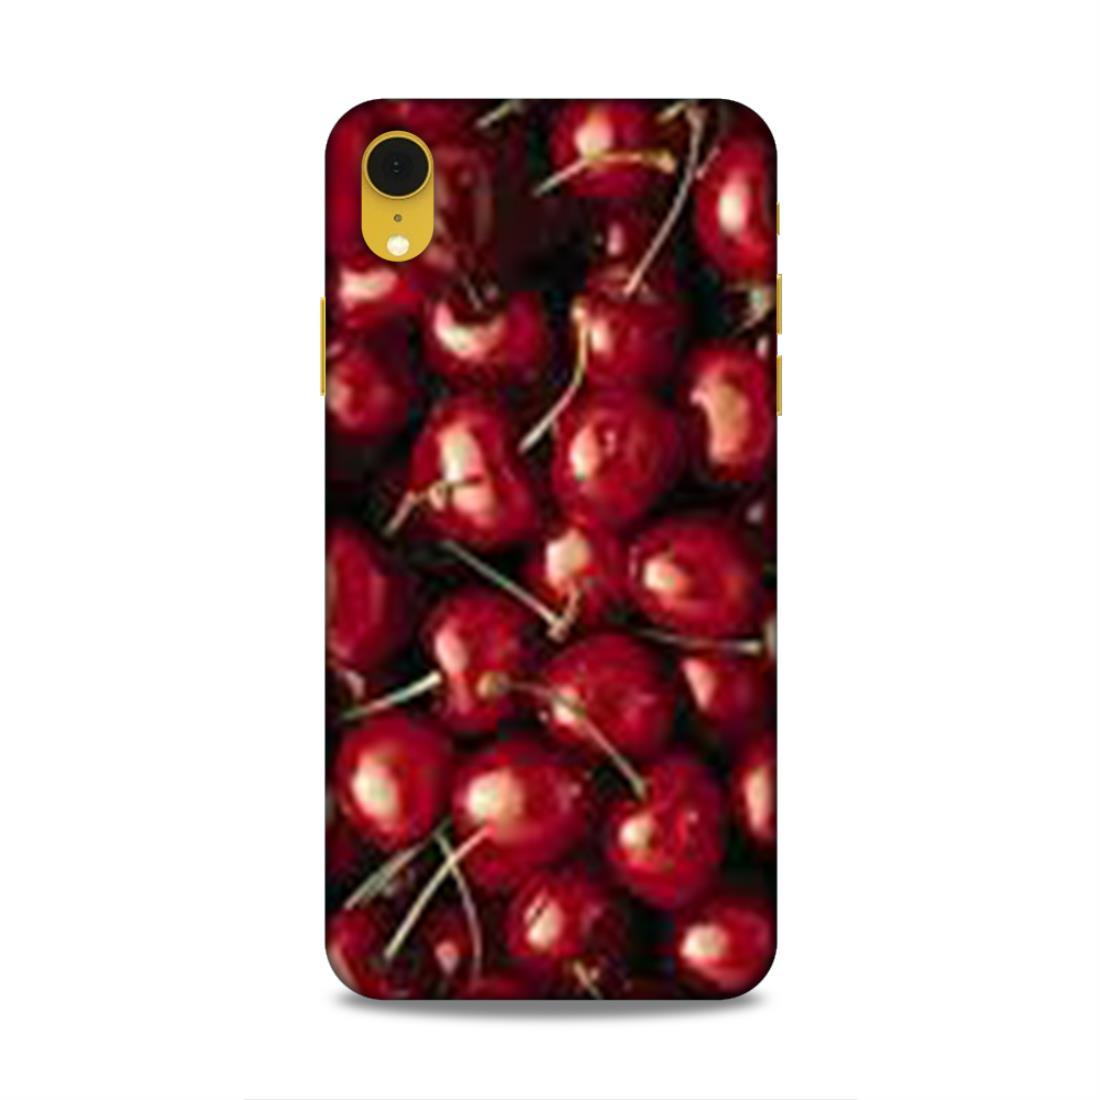 Red Cherry Love iPhone XR Mobile Cover Case